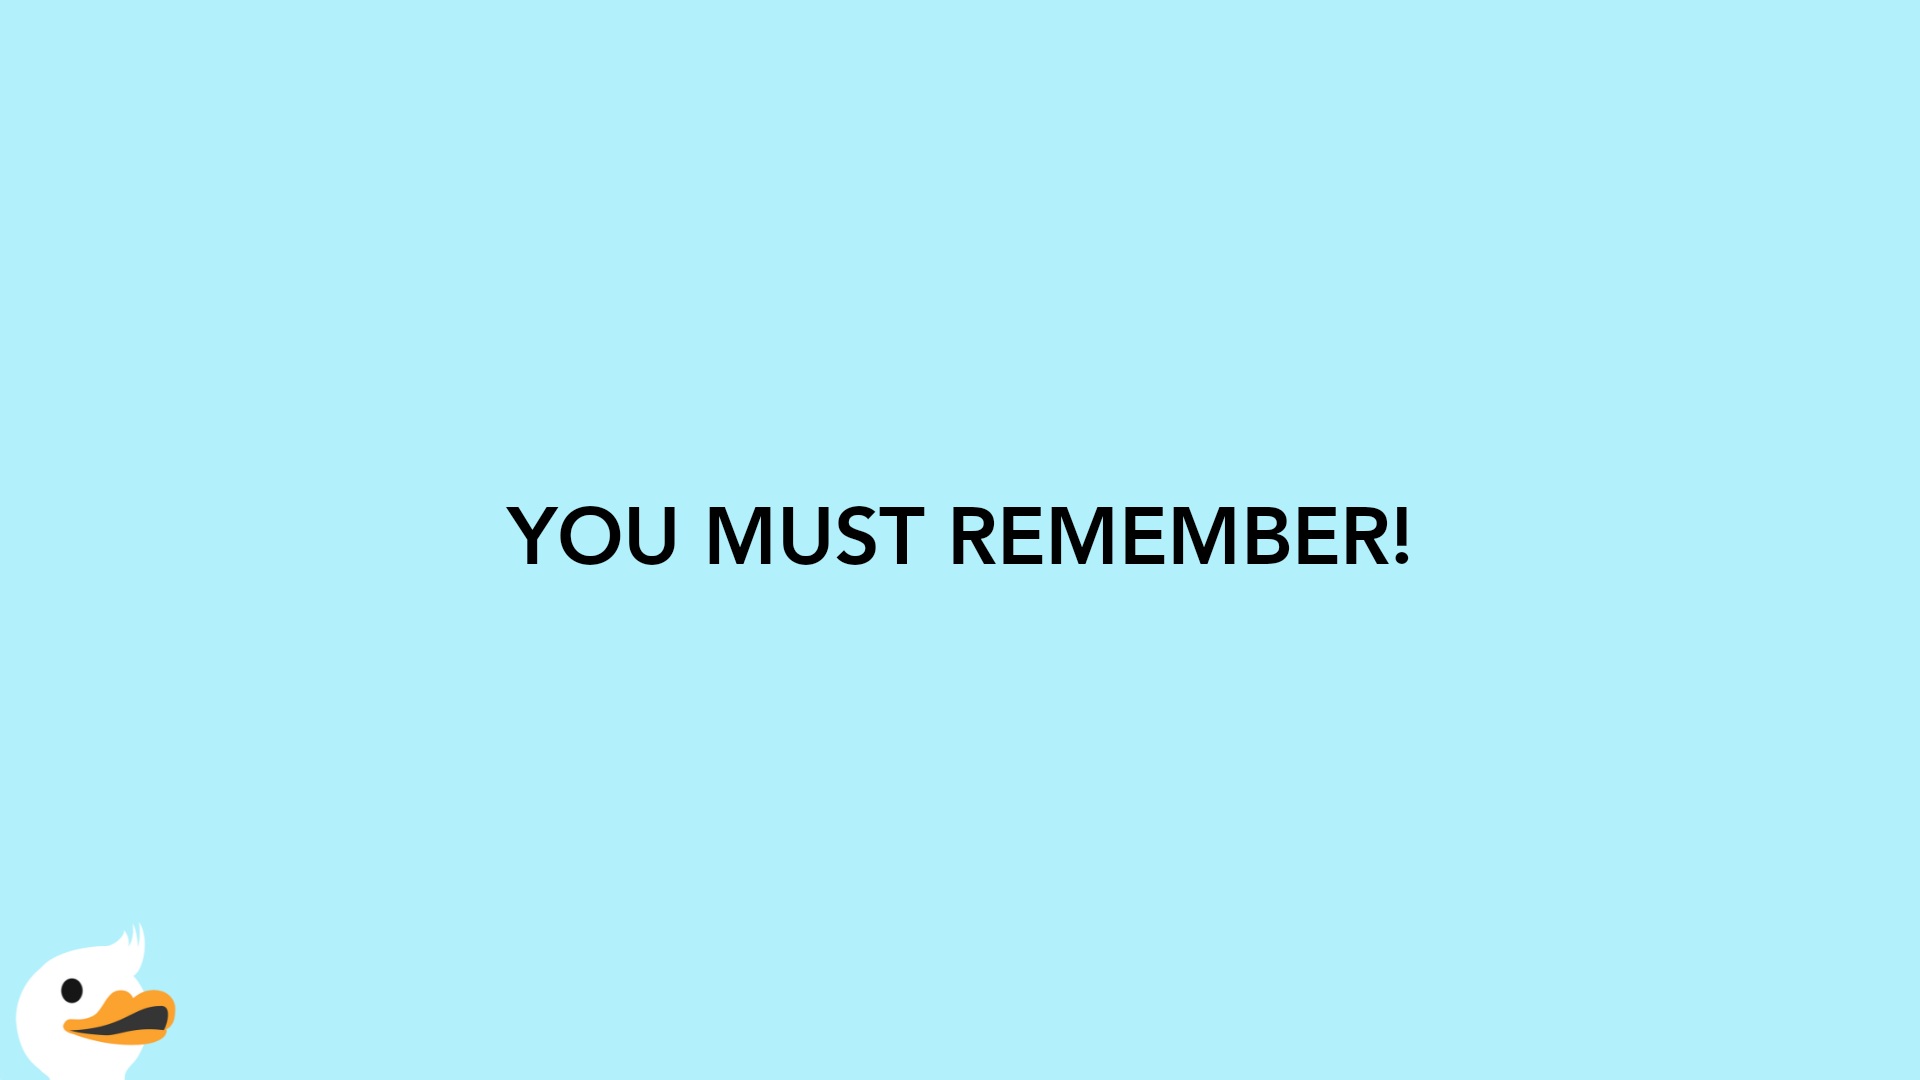 YOU MUST REMEMBER!